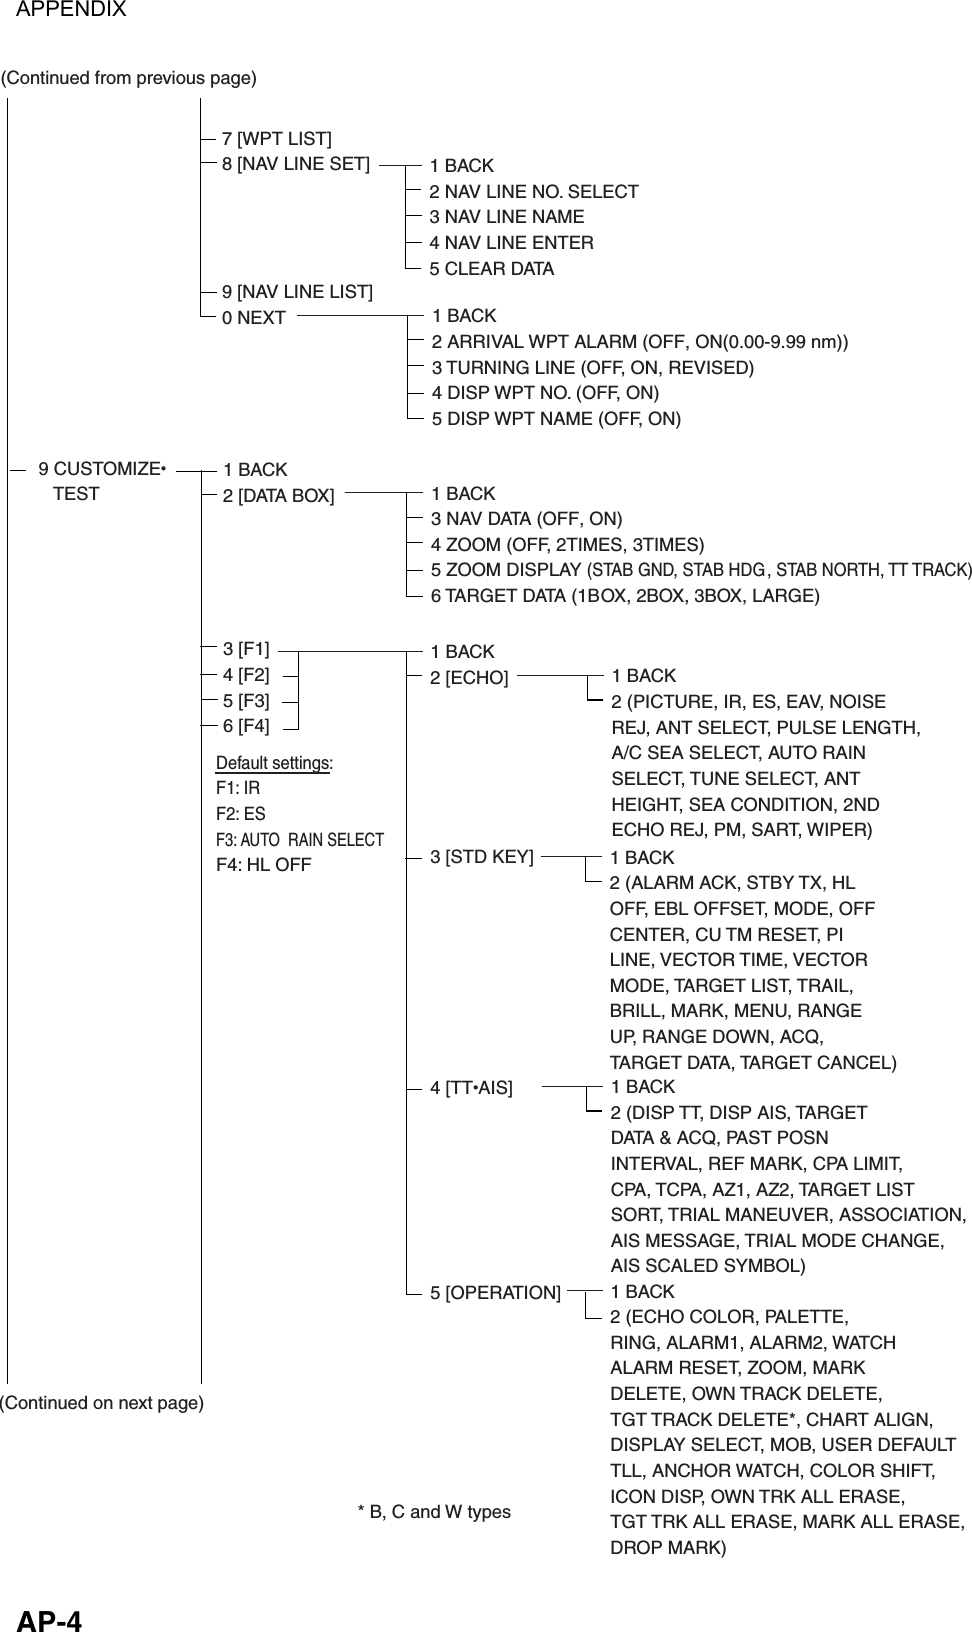 APPENDIX  AP-4 7 [WPT LIST]8 [NAV LINE SET]9 [NAV LINE LIST]0 NEXT(Continued on next page)(Continued from previous page)9 CUSTOMIZE   TEST1 BACK2 [DATA BOX]3 [F1]4 [F2]5 [F3]6 [F4] 1 BACK2 NAV LINE NO. SELECT3 NAV LINE NAME4 NAV LINE ENTER5 CLEAR DATA1 BACK2 ARRIVAL WPT ALARM (OFF, ON(0.00-9.99 nm))3 TURNING LINE (OFF, ON, REVISED)4 DISP WPT NO. (OFF, ON)5 DISP WPT NAME (OFF, ON)1 BACK3 NAV DATA (OFF, ON)4 ZOOM (OFF, 2TIMES, 3TIMES)5 ZOOM DISPLAY (STAB GND, STAB HDG, STAB NORTH, TT TRACK)6 TARGET DATA (1BOX, 2BOX, 3BOX, LARGE)1 BACK2 [ECHO]3 [STD KEY]4 [TTAIS]5 [OPERATION]1 BACK2 (PICTURE, IR, ES, EAV, NOISEREJ, ANT SELECT, PULSE LENGTH,A/C SEA SELECT, AUTO RAINSELECT, TUNE SELECT, ANTHEIGHT, SEA CONDITION, 2NDECHO REJ, PM, SART, WIPER)1 BACK2 (ALARM ACK, STBY TX, HLOFF, EBL OFFSET, MODE, OFFCENTER, CU TM RESET, PILINE, VECTOR TIME, VECTORMODE, TARGET LIST, TRAIL,BRILL, MARK, MENU, RANGEUP, RANGE DOWN, ACQ, TARGET DATA, TARGET CANCEL)1 BACK2 (DISP TT, DISP AIS, TARGETDATA &amp; ACQ, PAST POSNINTERVAL, REF MARK, CPA LIMIT,CPA, TCPA, AZ1, AZ2, TARGET LISTSORT, TRIAL MANEUVER, ASSOCIATION,AIS MESSAGE, TRIAL MODE CHANGE,AIS SCALED SYMBOL)1 BACK2 (ECHO COLOR, PALETTE, RING, ALARM1, ALARM2, WATCHALARM RESET, ZOOM, MARKDELETE, OWN TRACK DELETE,TGT TRACK DELETE*, CHART ALIGN,DISPLAY SELECT, MOB, USER DEFAULT TLL, ANCHOR WATCH, COLOR SHIFT, ICON DISP, OWN TRK ALL ERASE, TGT TRK ALL ERASE, MARK ALL ERASE,DROP MARK) Default settings:F1: IRF2: ESF3: AUTO  RAIN SELECTF4: HL OFF* B, C and W types 